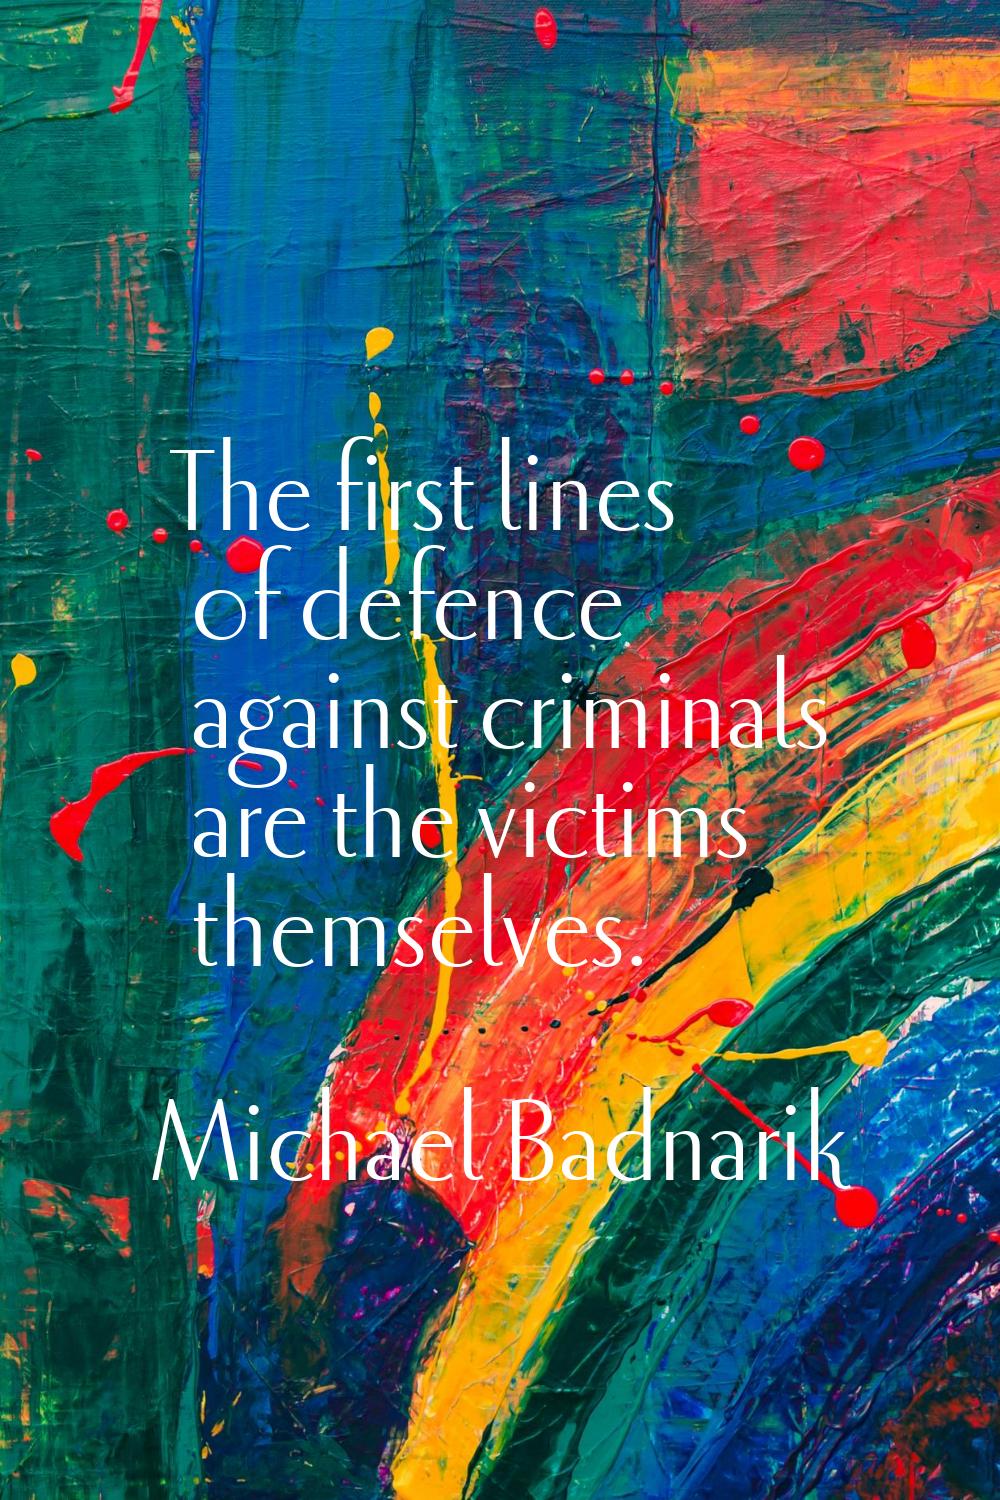 The first lines of defence against criminals are the victims themselves.